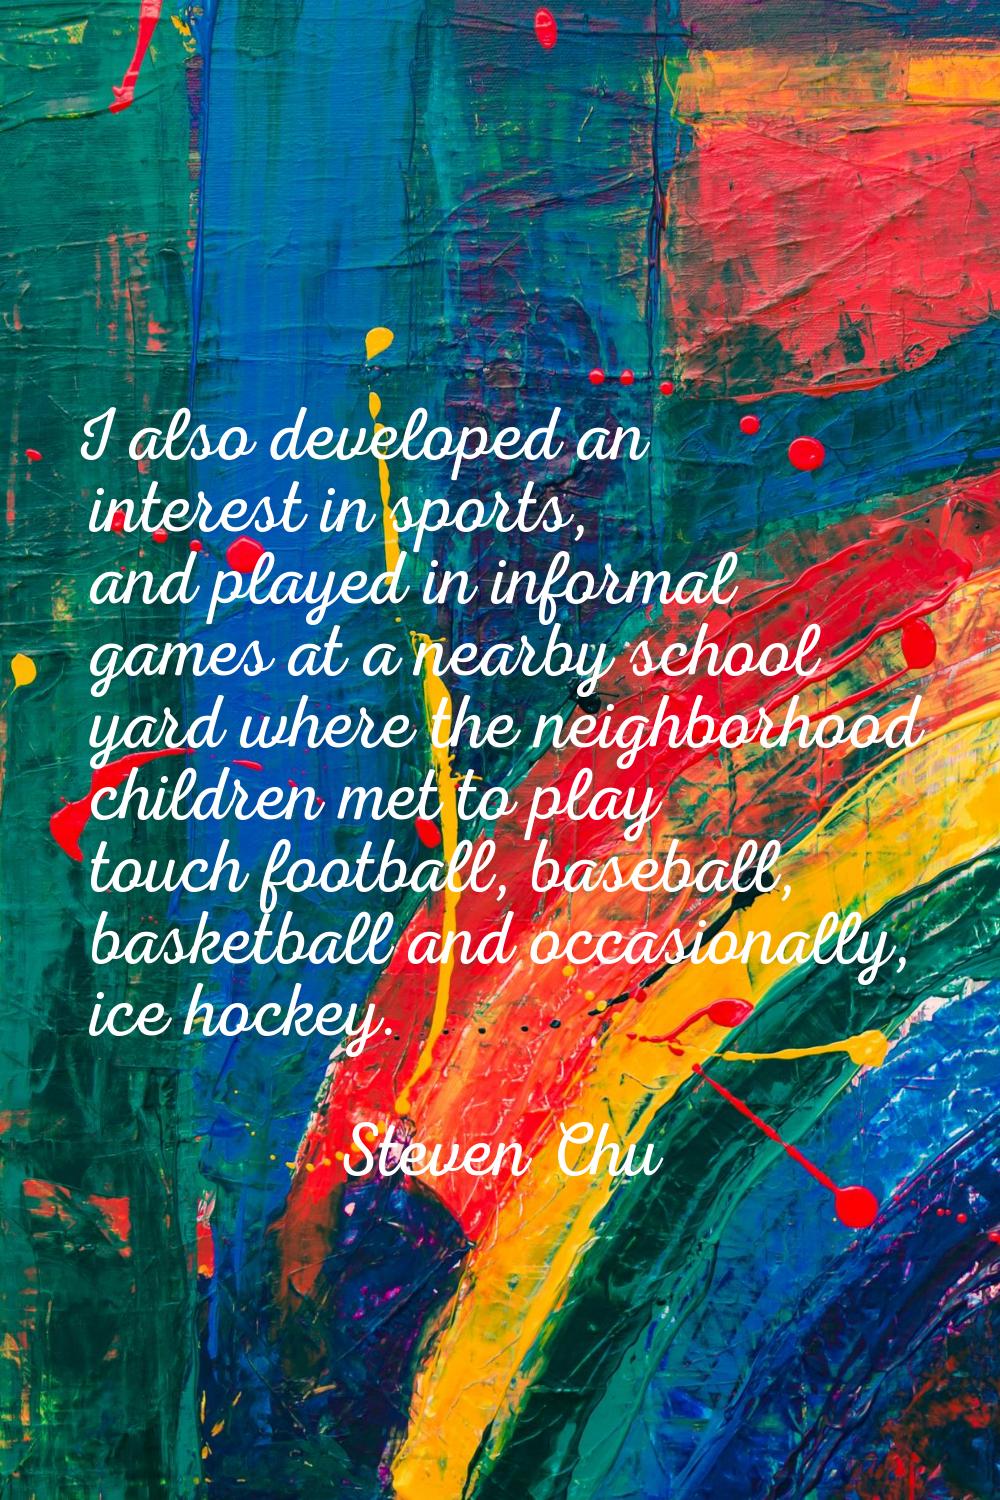 I also developed an interest in sports, and played in informal games at a nearby school yard where 